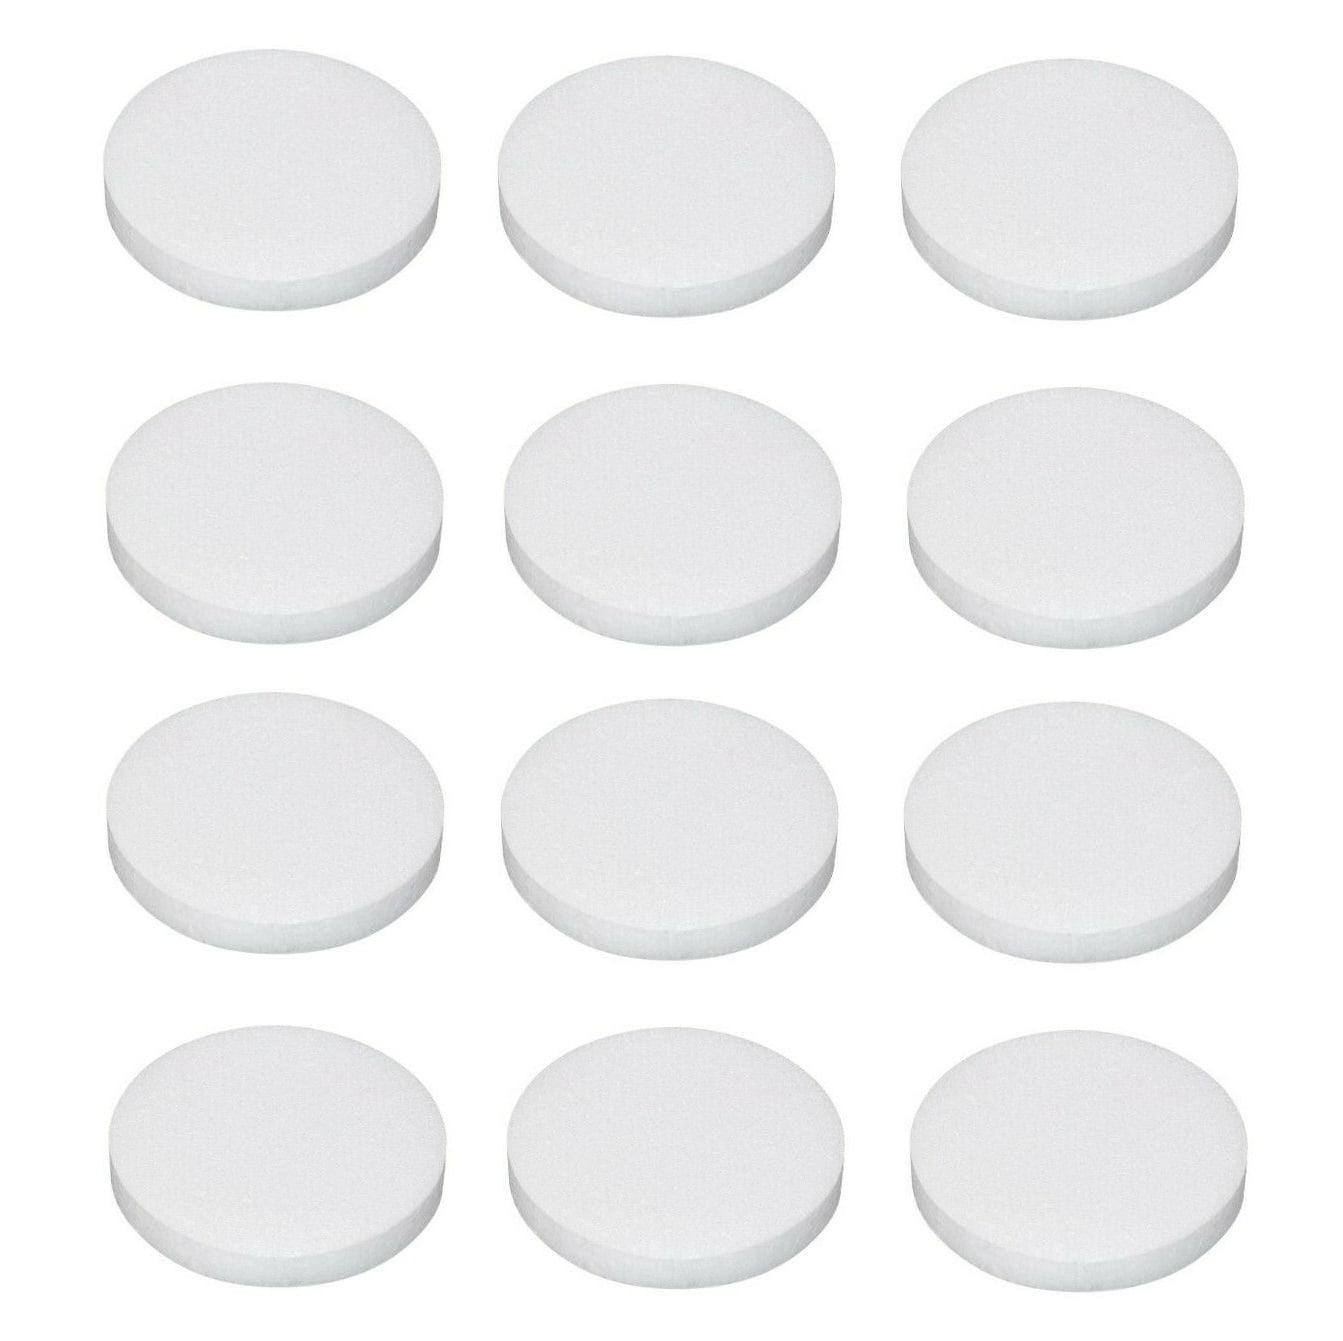 Package of 12 Flat Round 10 Styrofoam Discs for Crafting, Florals, and Pro  